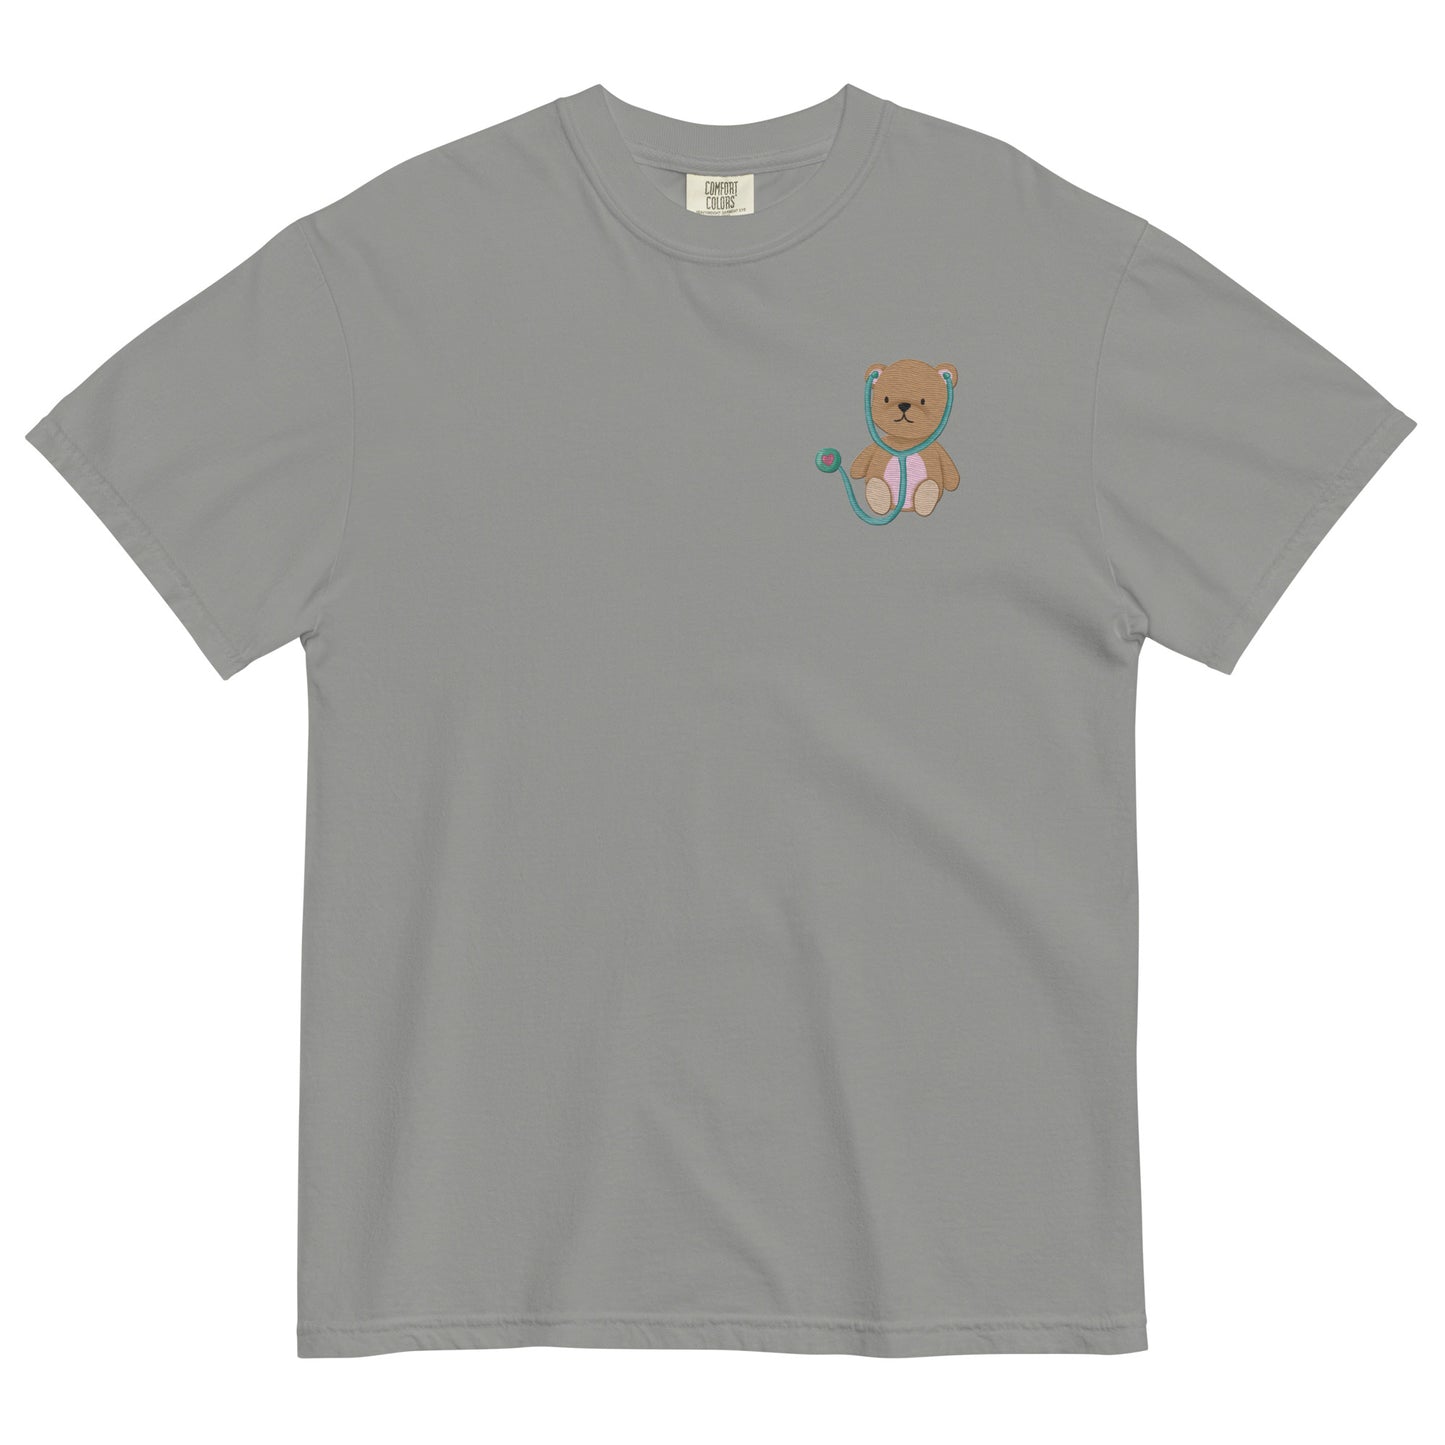 TEDDY BEAR Embroidered Unisex garment-dyed T shirt